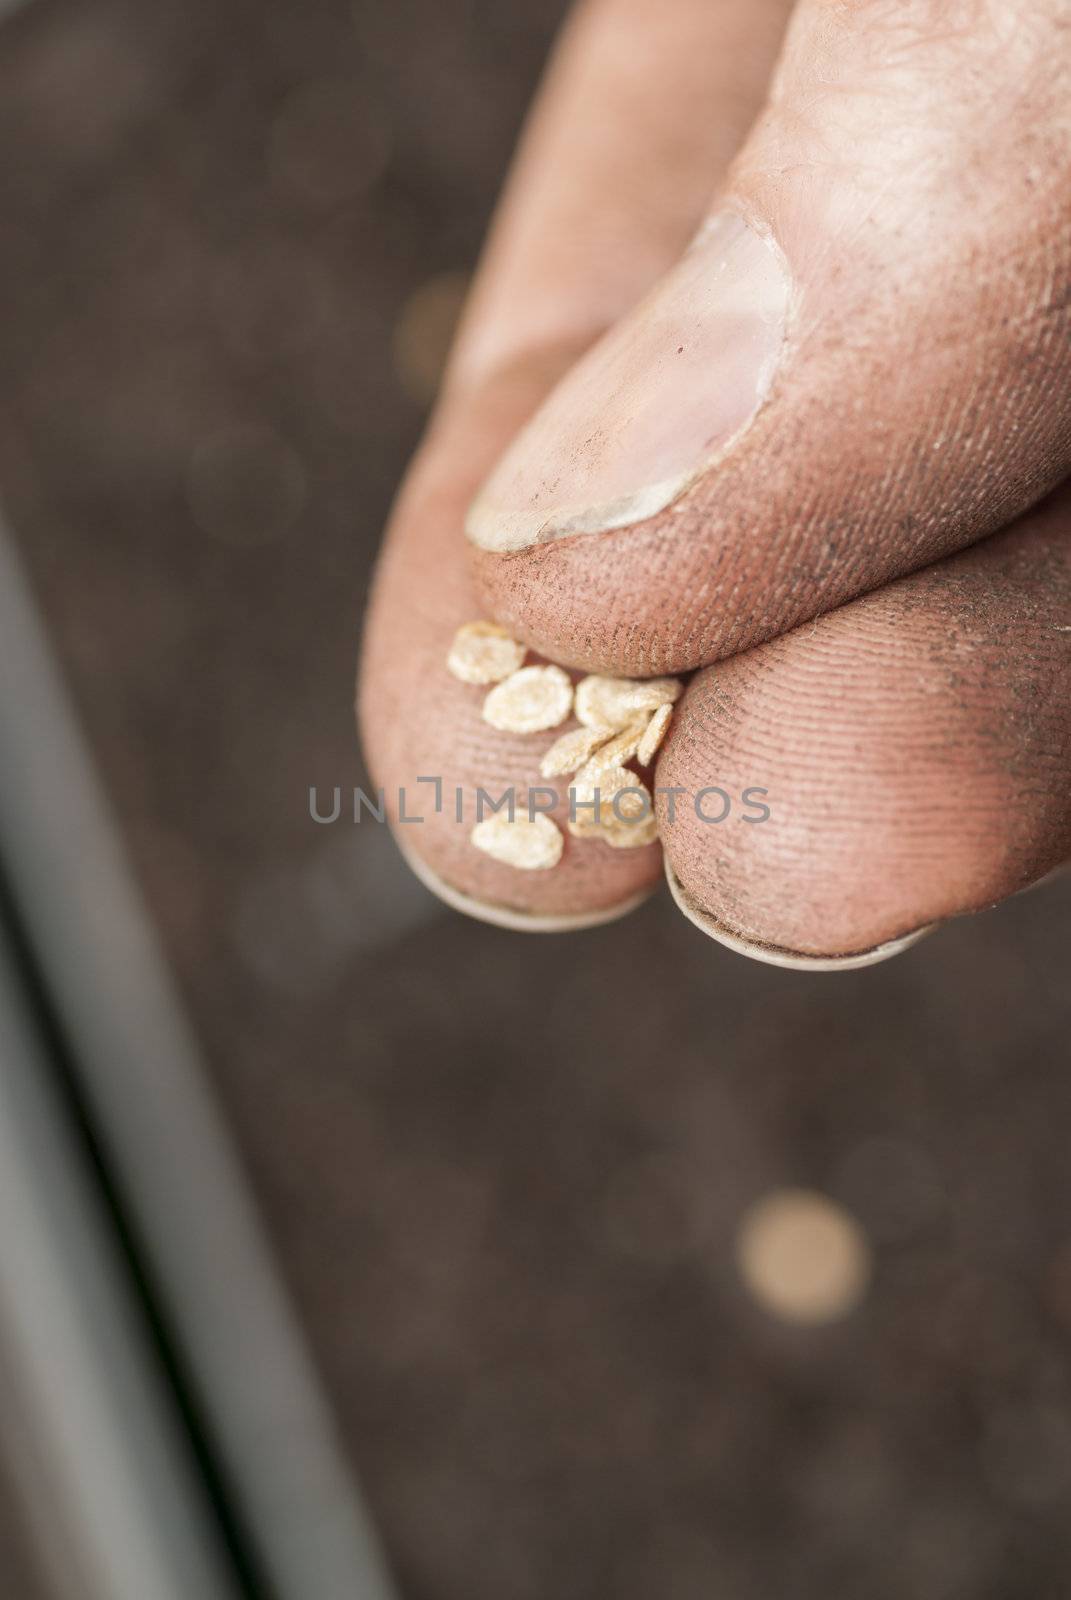 Sowing Tomato Seeds into Soil. by swellphotography